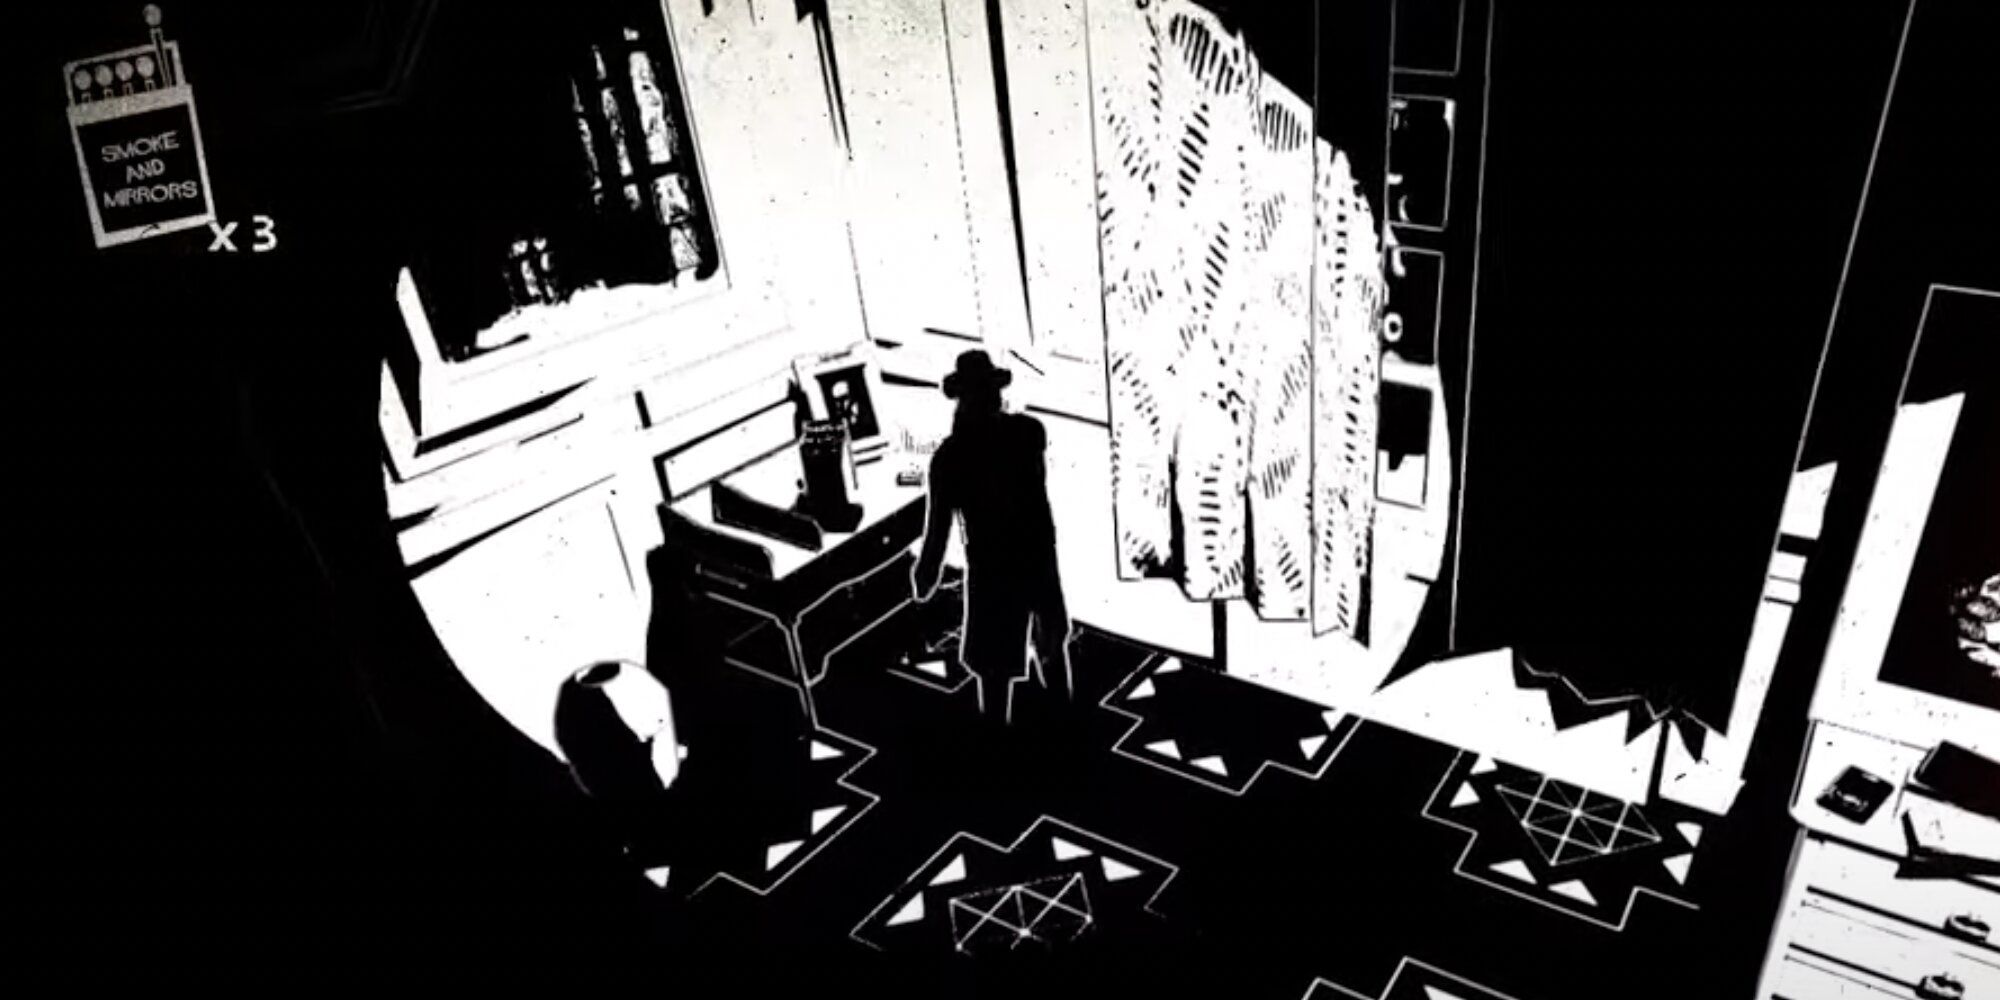 Exploring the Drawing Room in White Night with a match